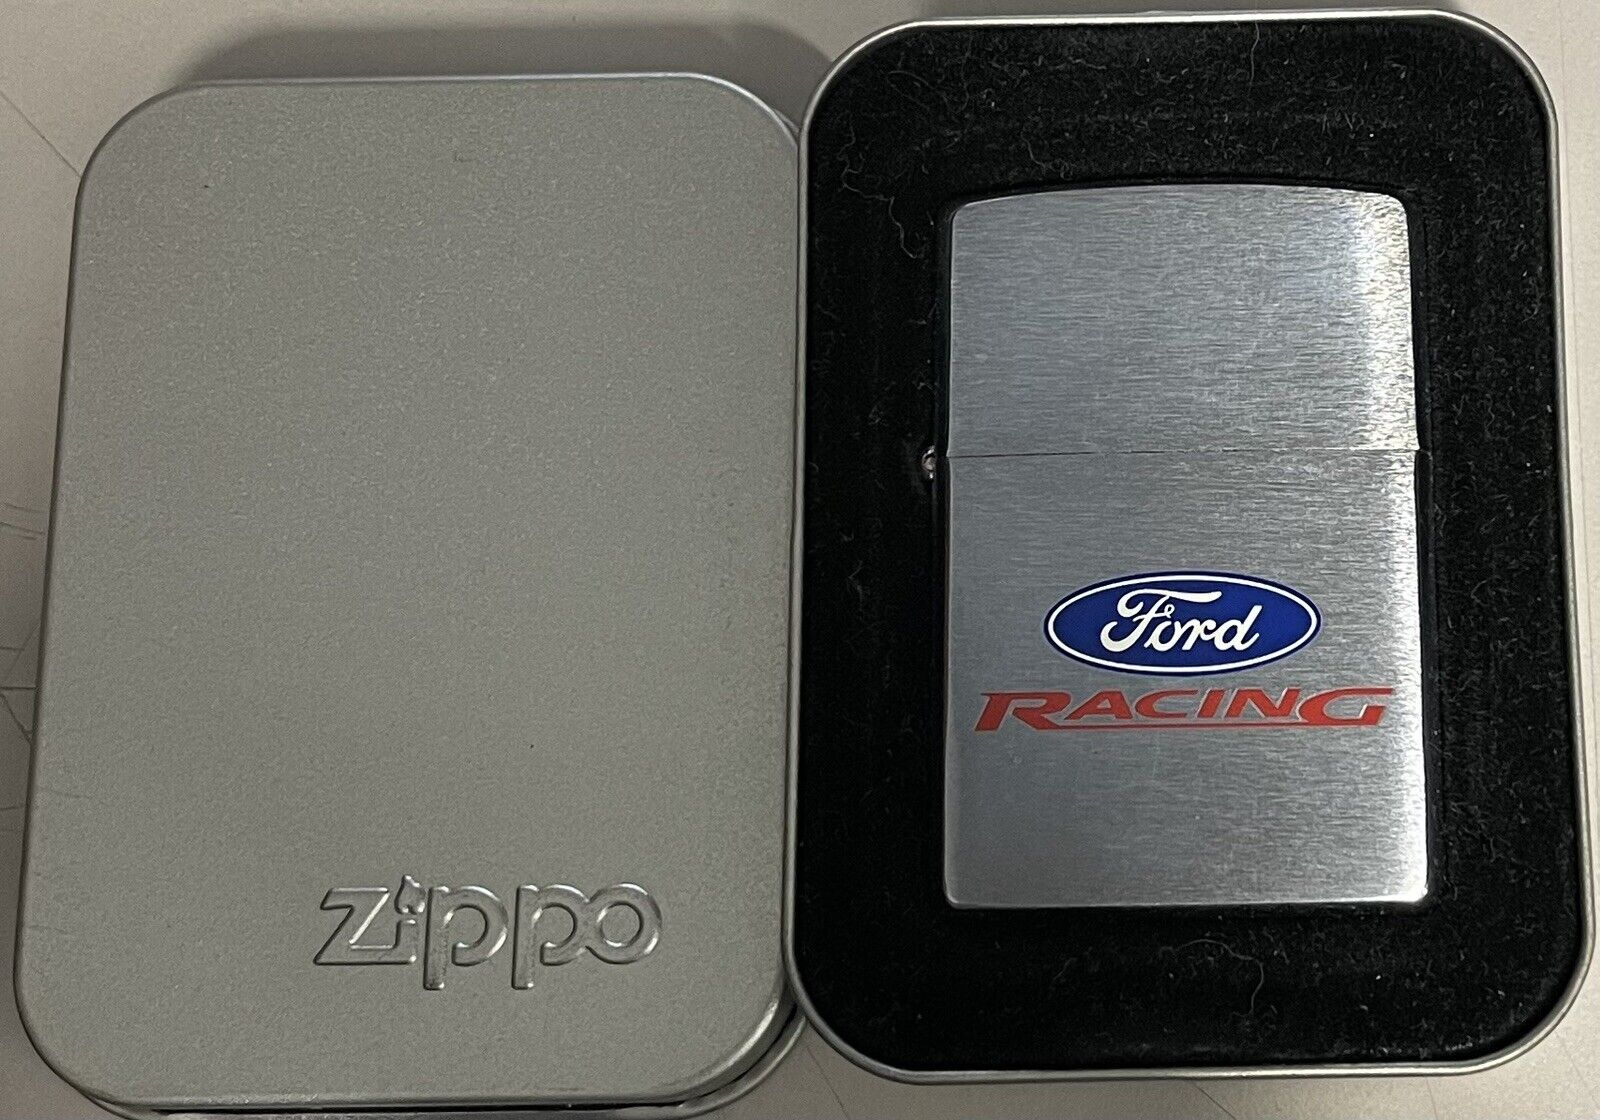 ZIPPO 2001 FORD RACING BRUSHED CHROME LIGHTER SEALED IN BOX c664